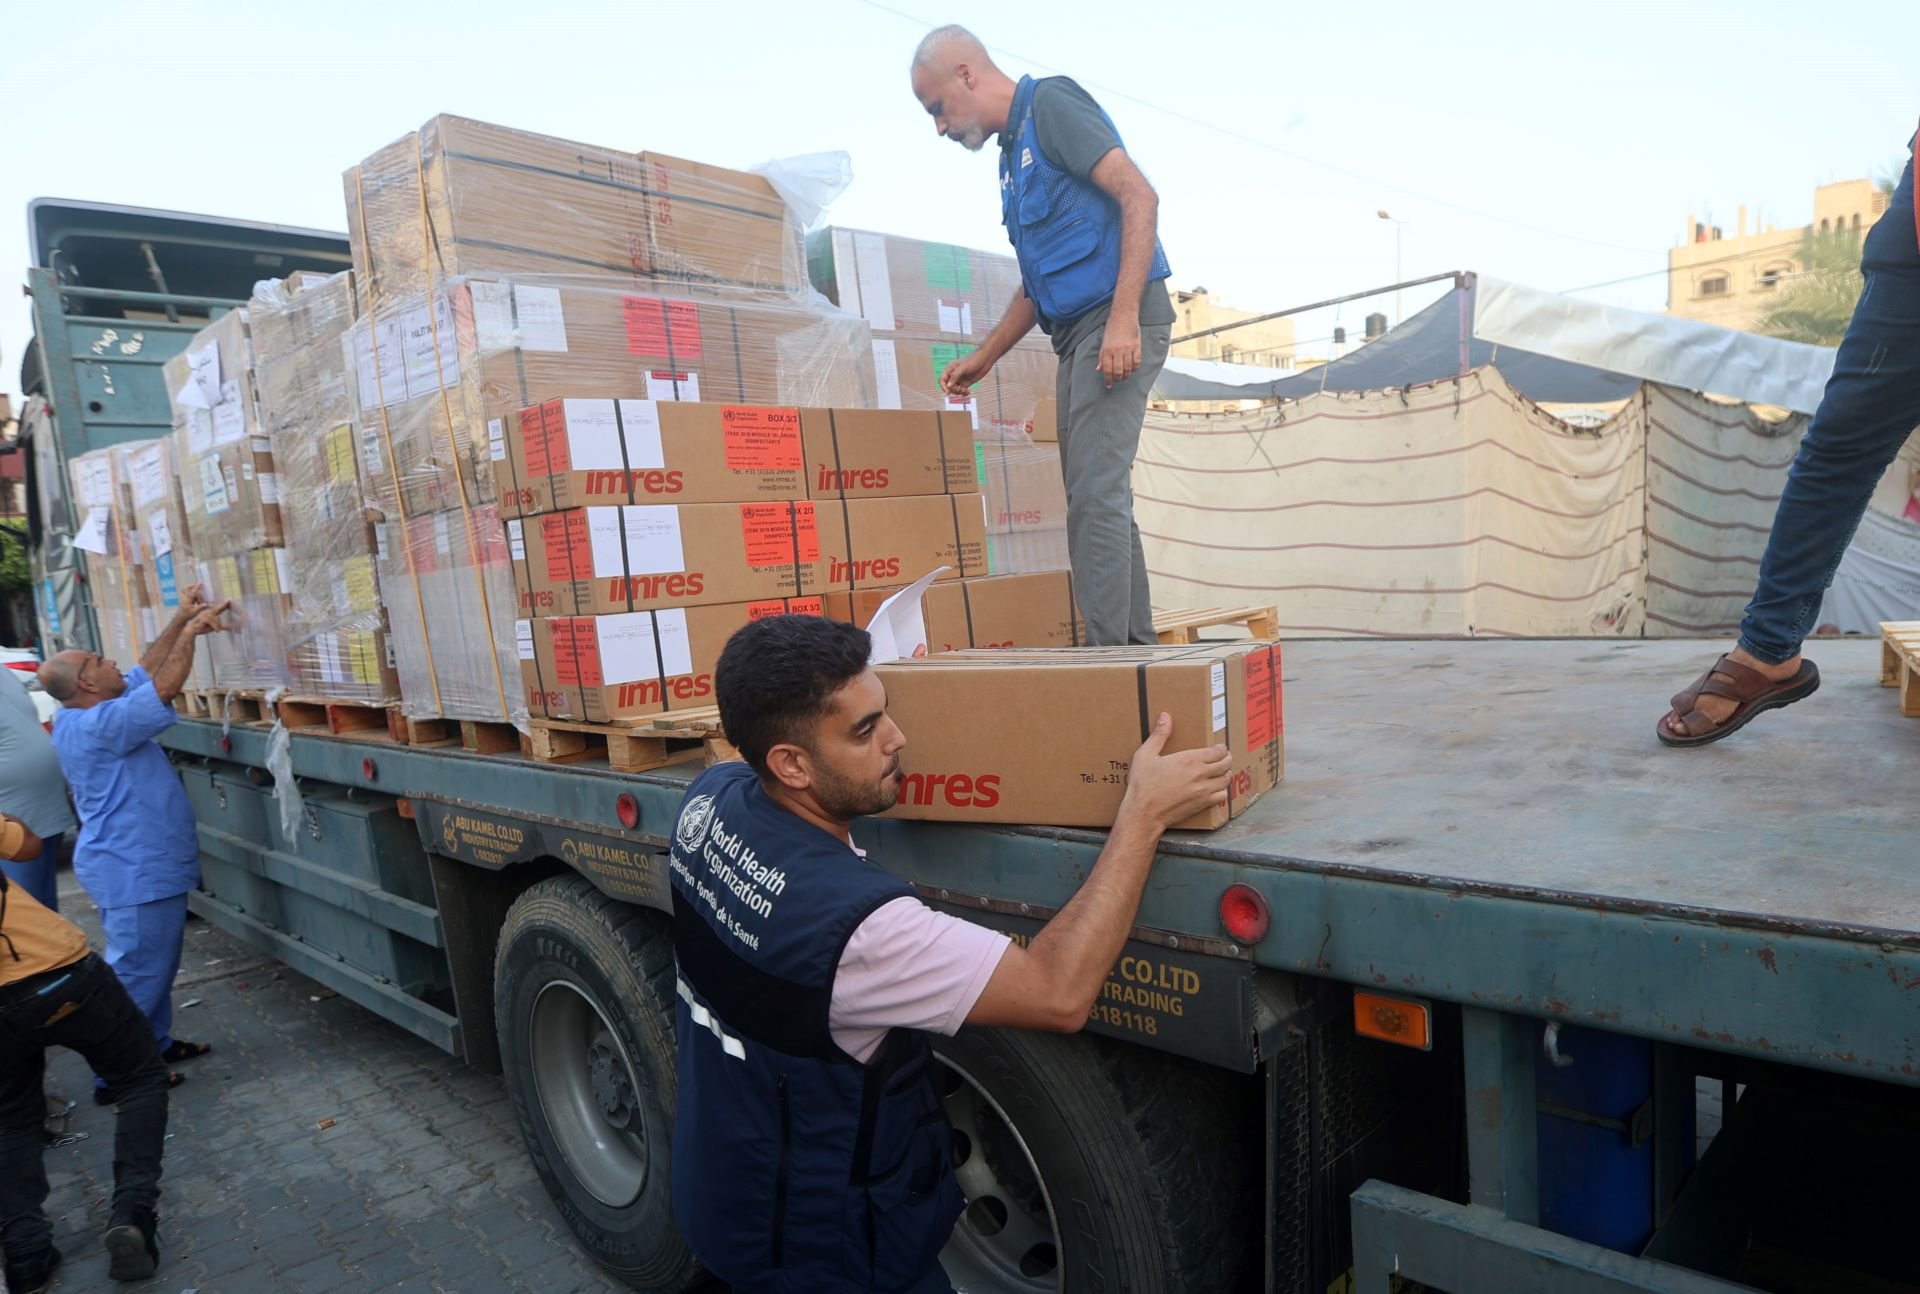 Men unloading boxes of medical supplies from a large truck